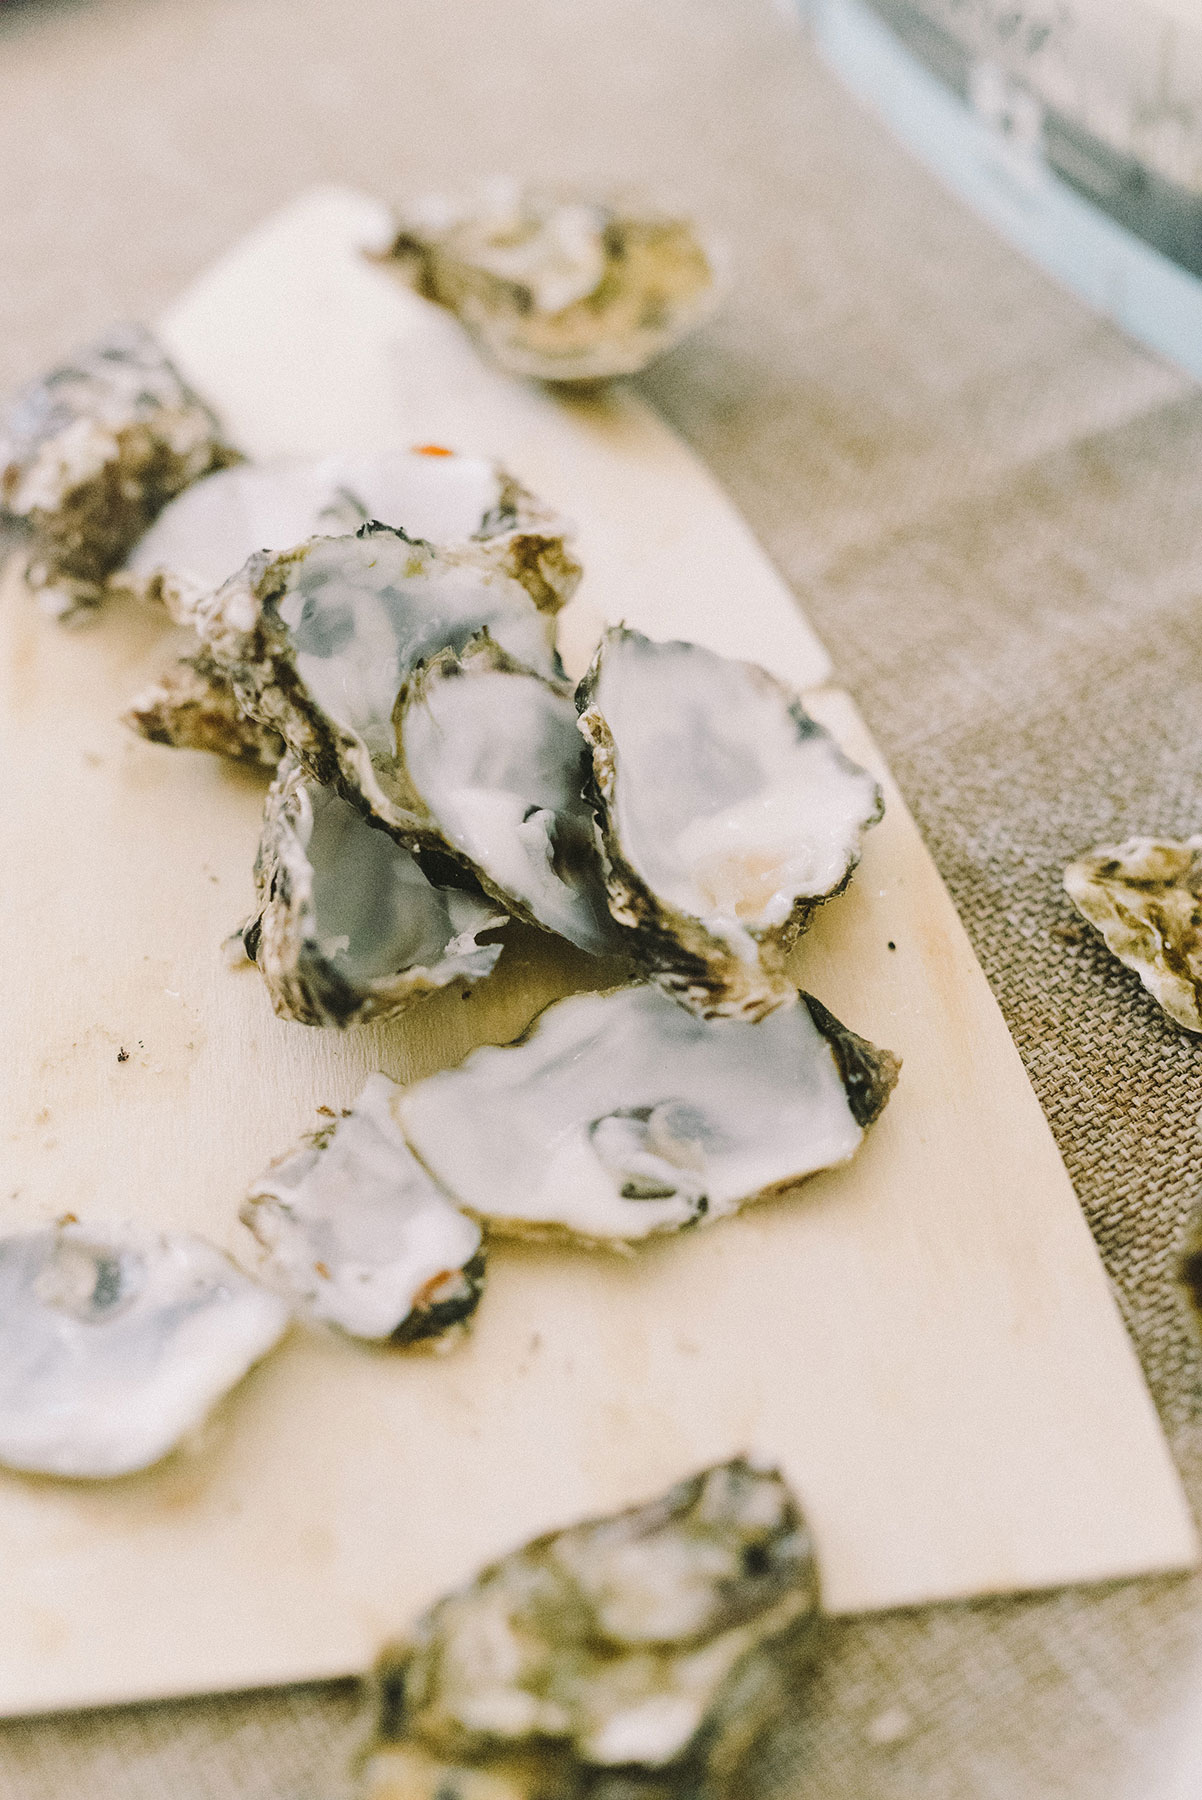 Oyster shells on a wooden serving tray